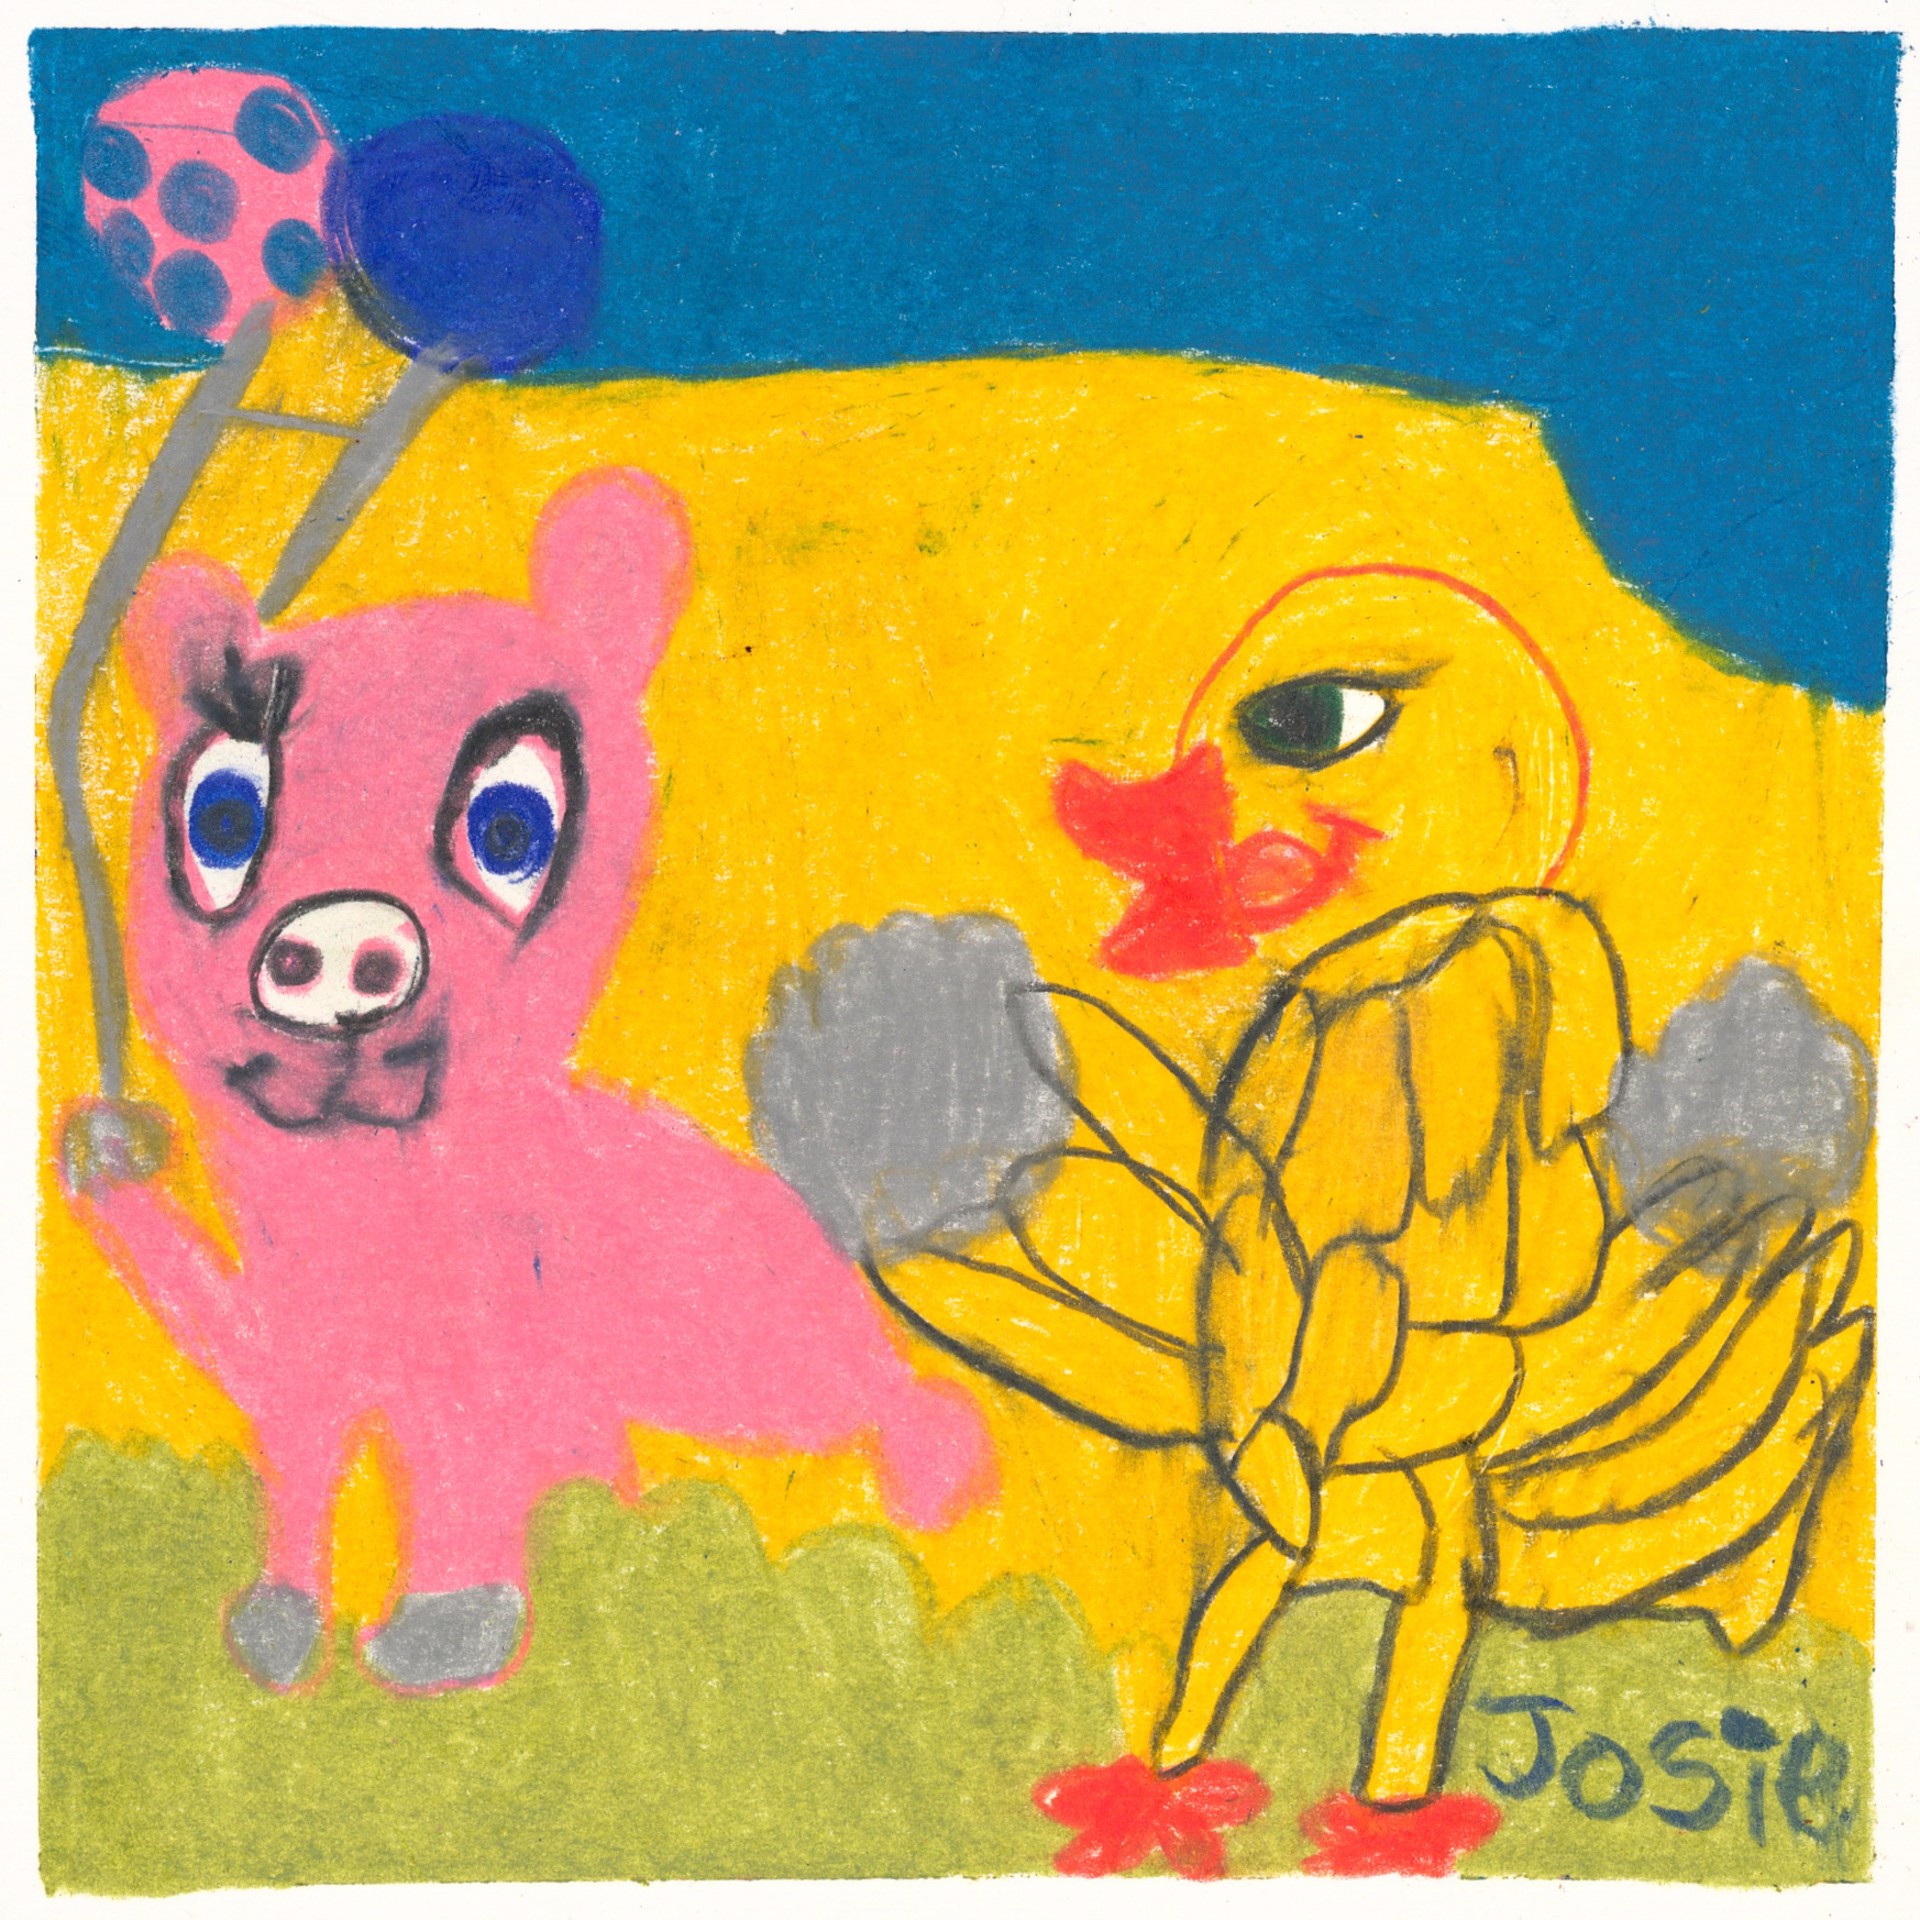 The Pig and Duck Are Friends! by Josephine Finnell